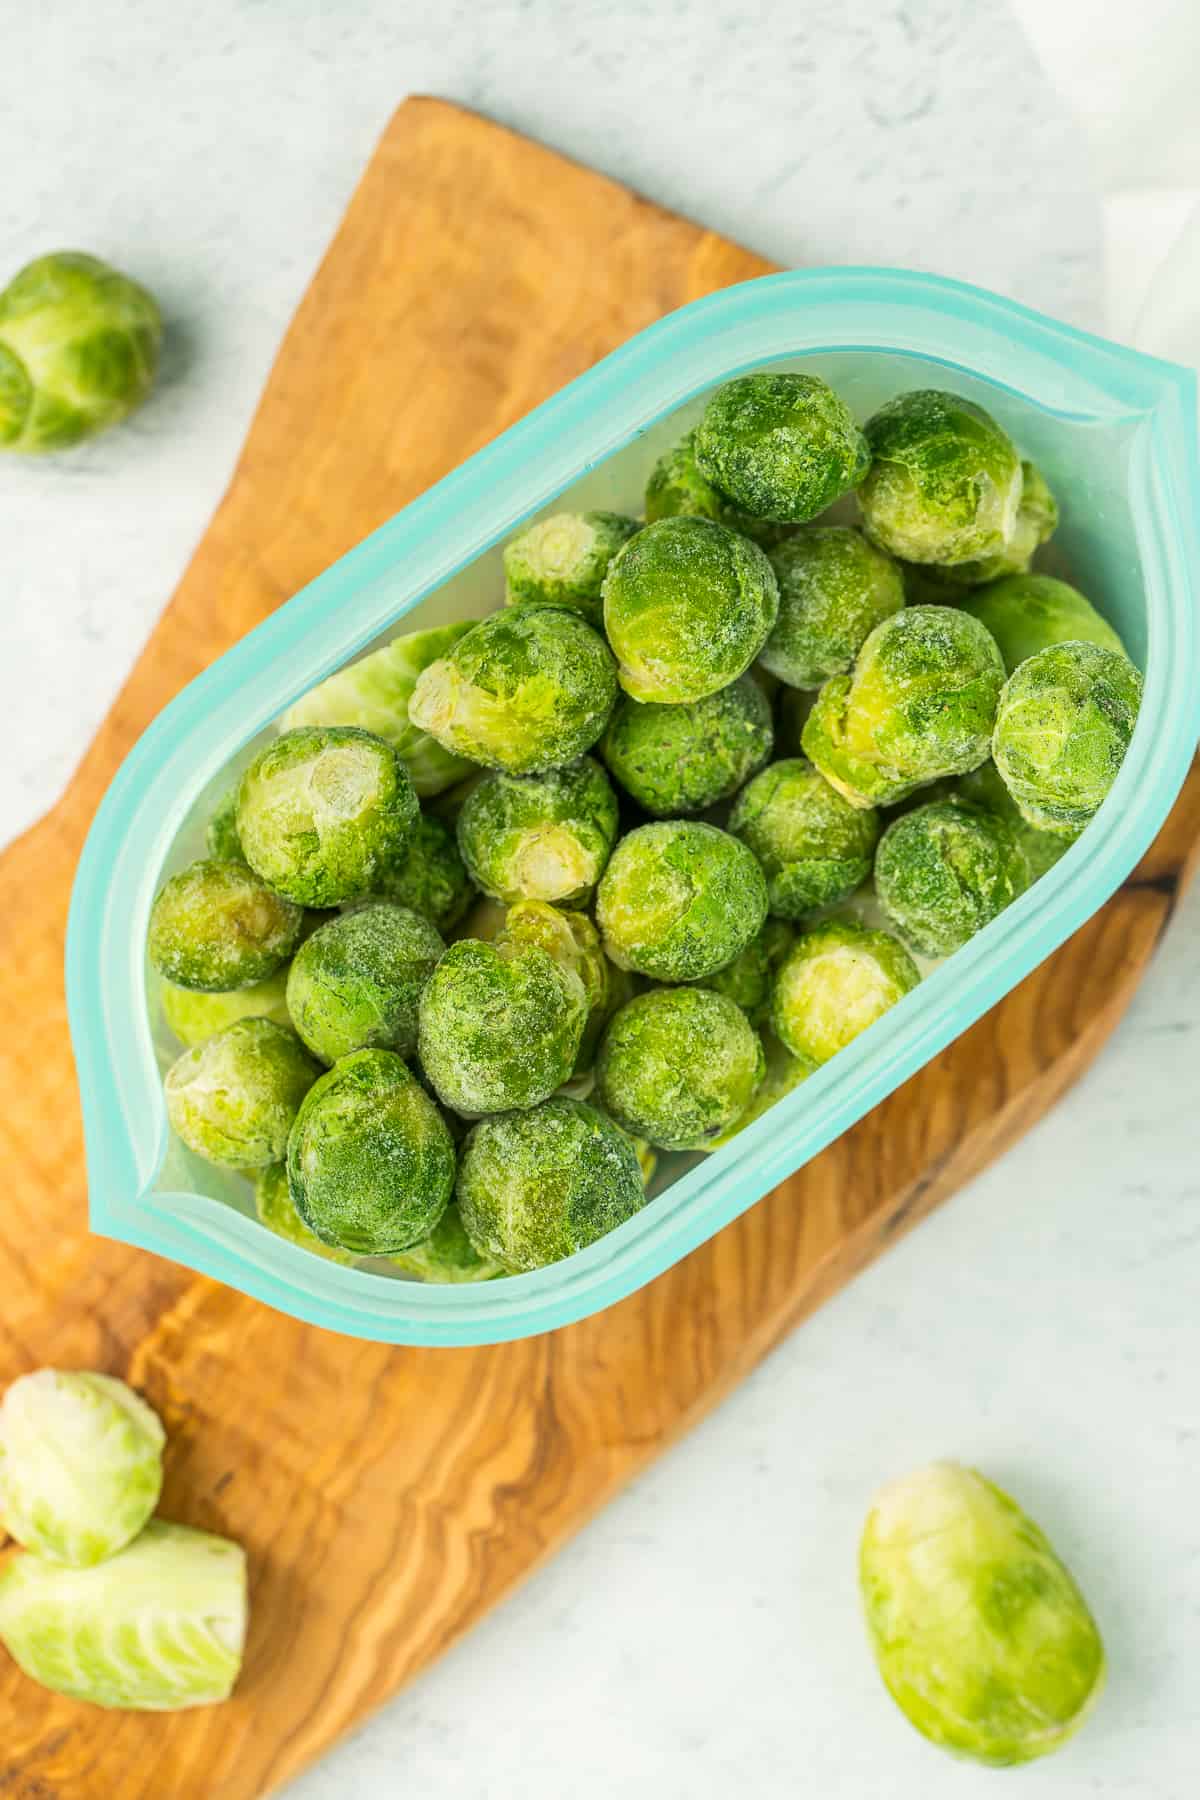 a blue reusable silicone bag full of frozen brussel sprouts.